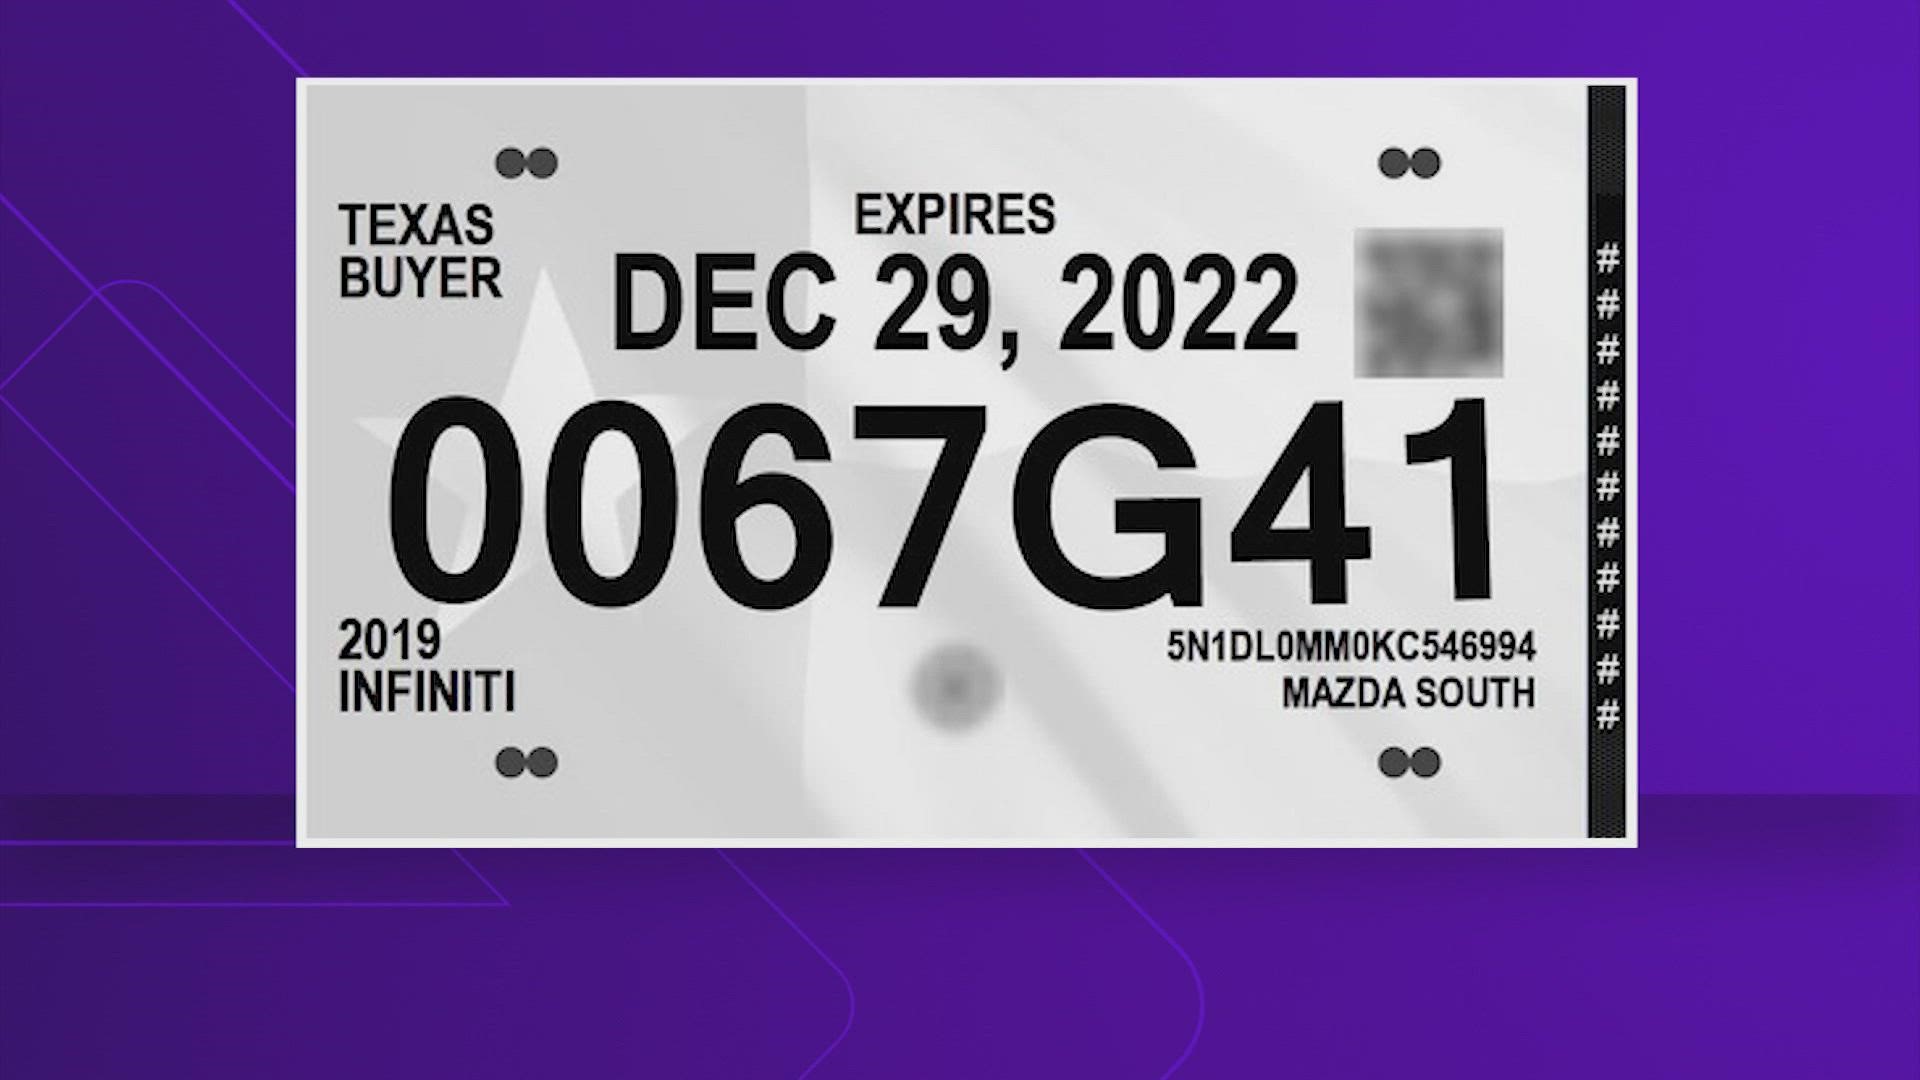 The Texas DMV revealed its redesigned tags with new security features in an effort to fight counterfeit tags.